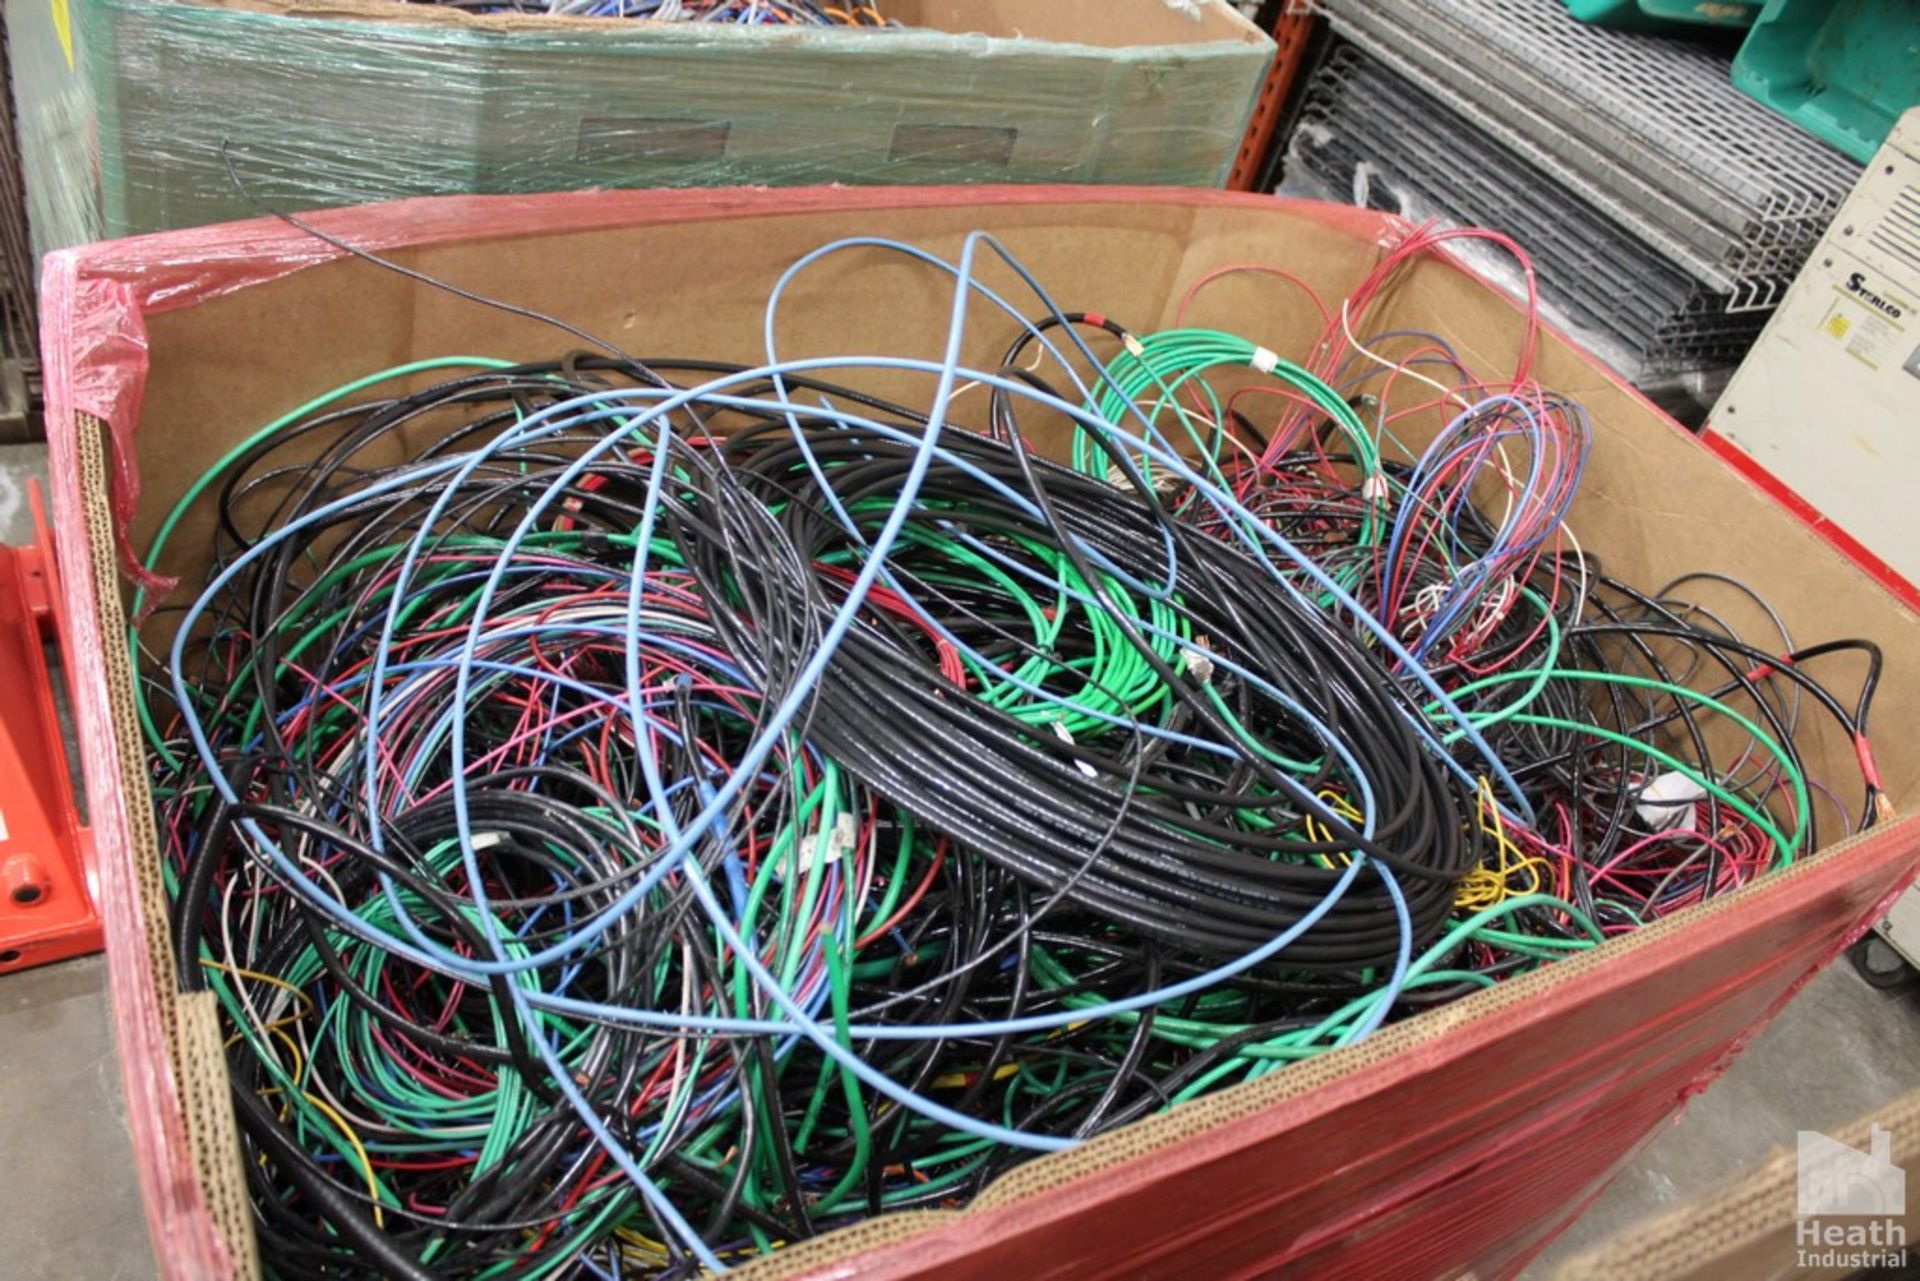 LARGE QUANTITY OF COPPER WIRE CUTOFFS IN GAYLORD - Image 2 of 4